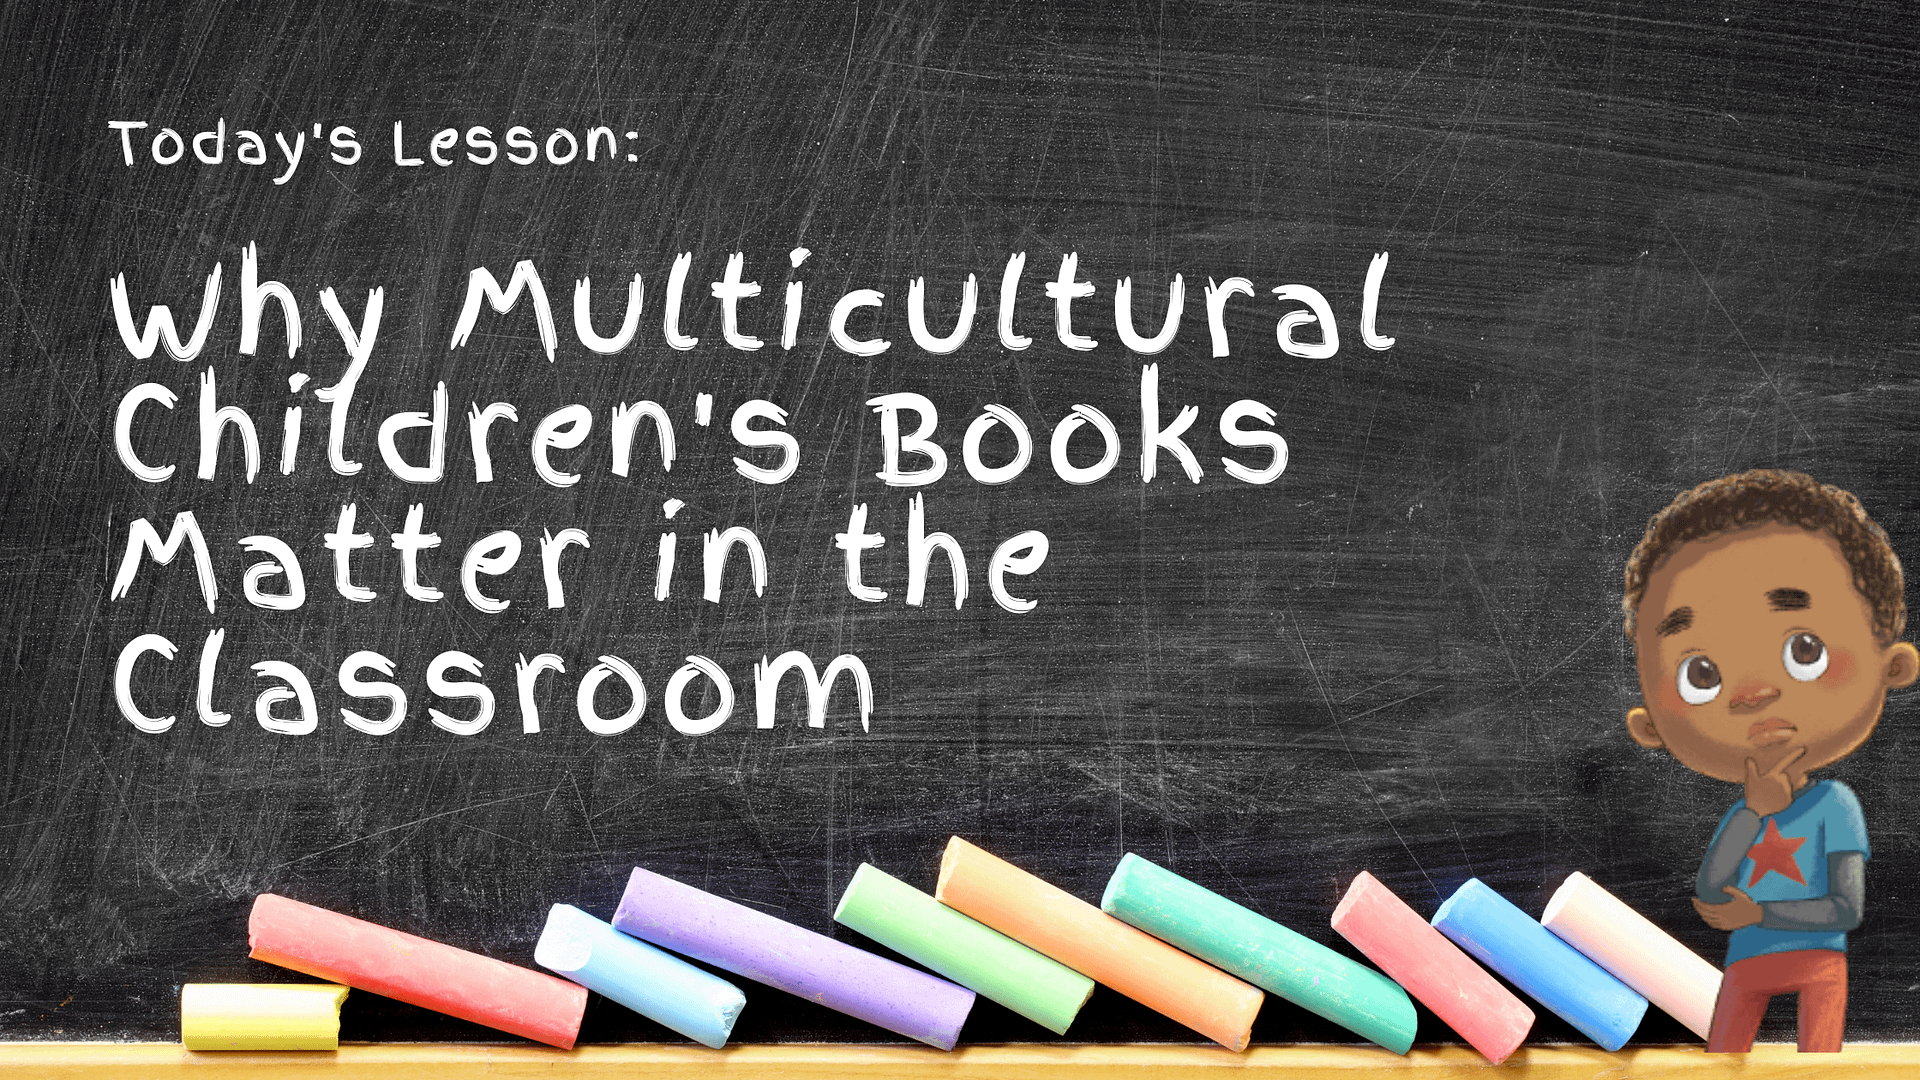 Why Multicultural Children's Books Matter in the Classroom